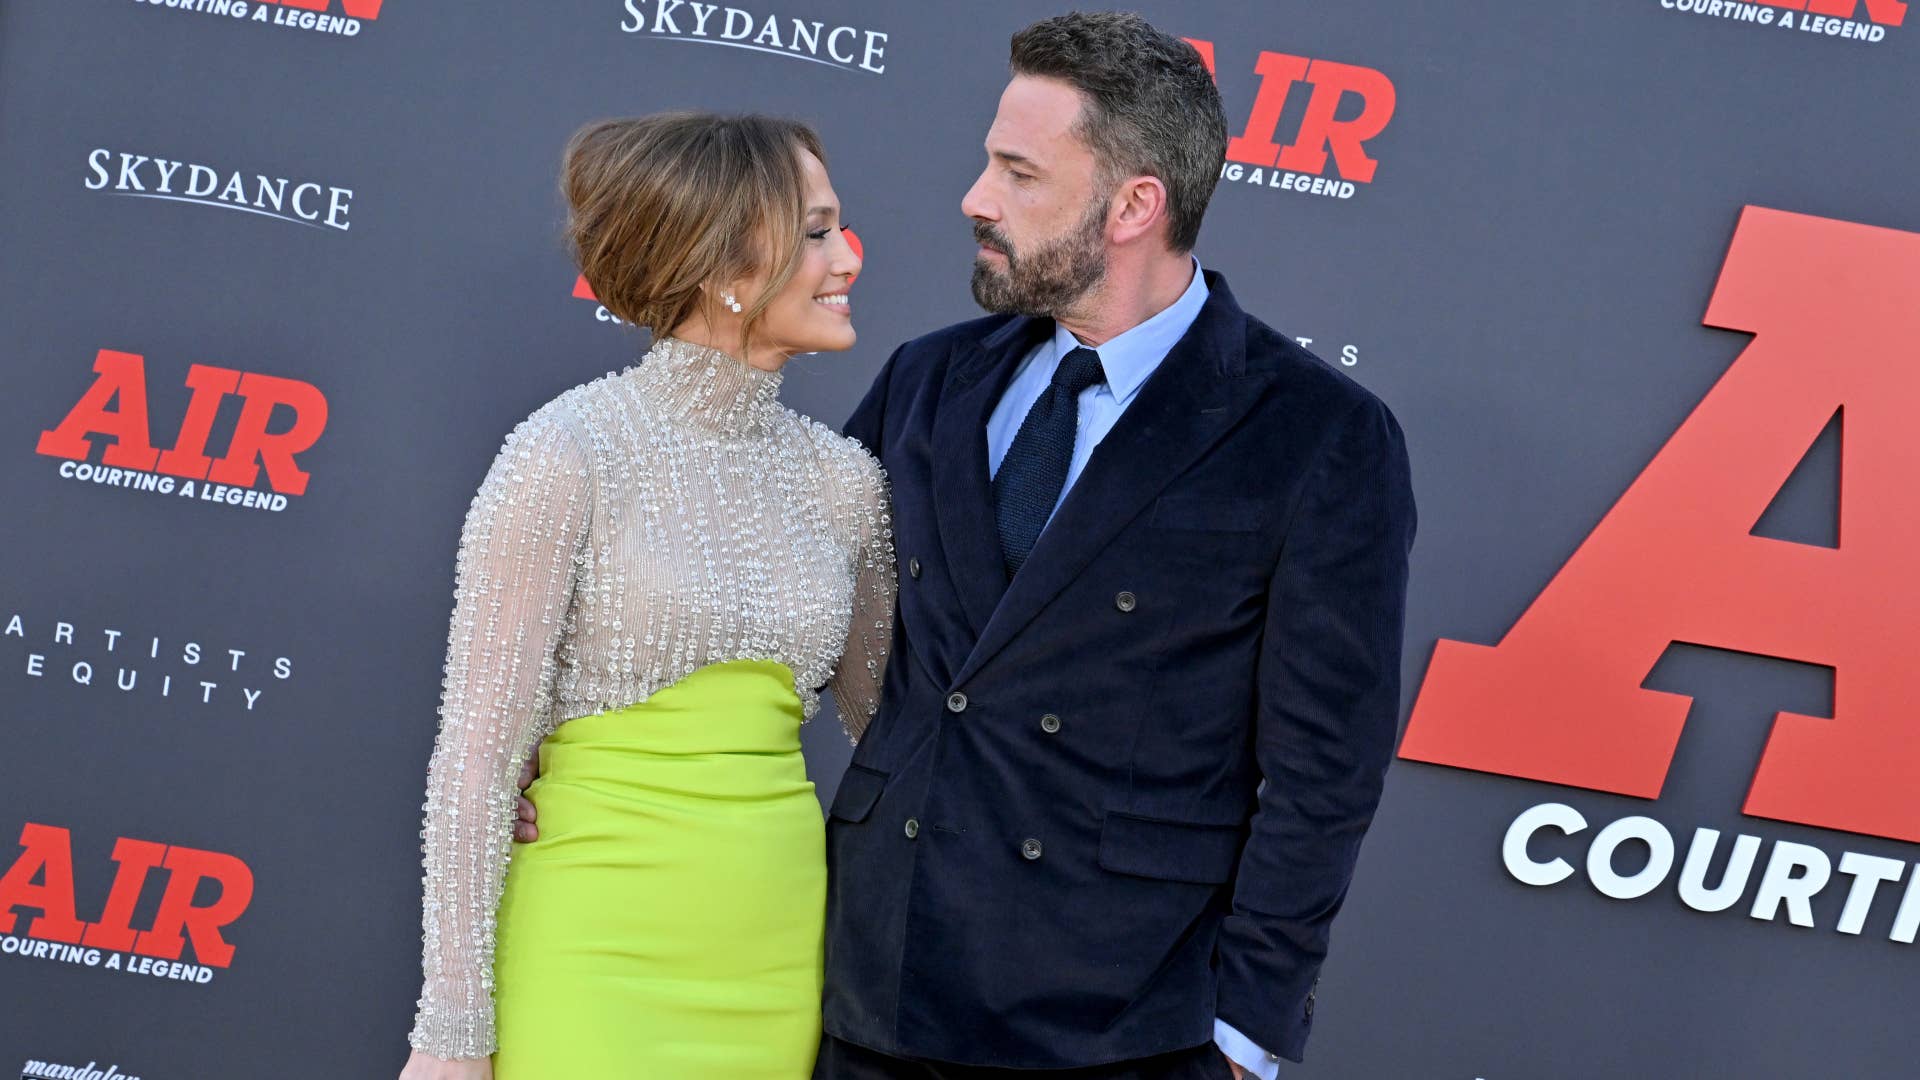 jennifer lopez and ben affleck are pictured on red carpet